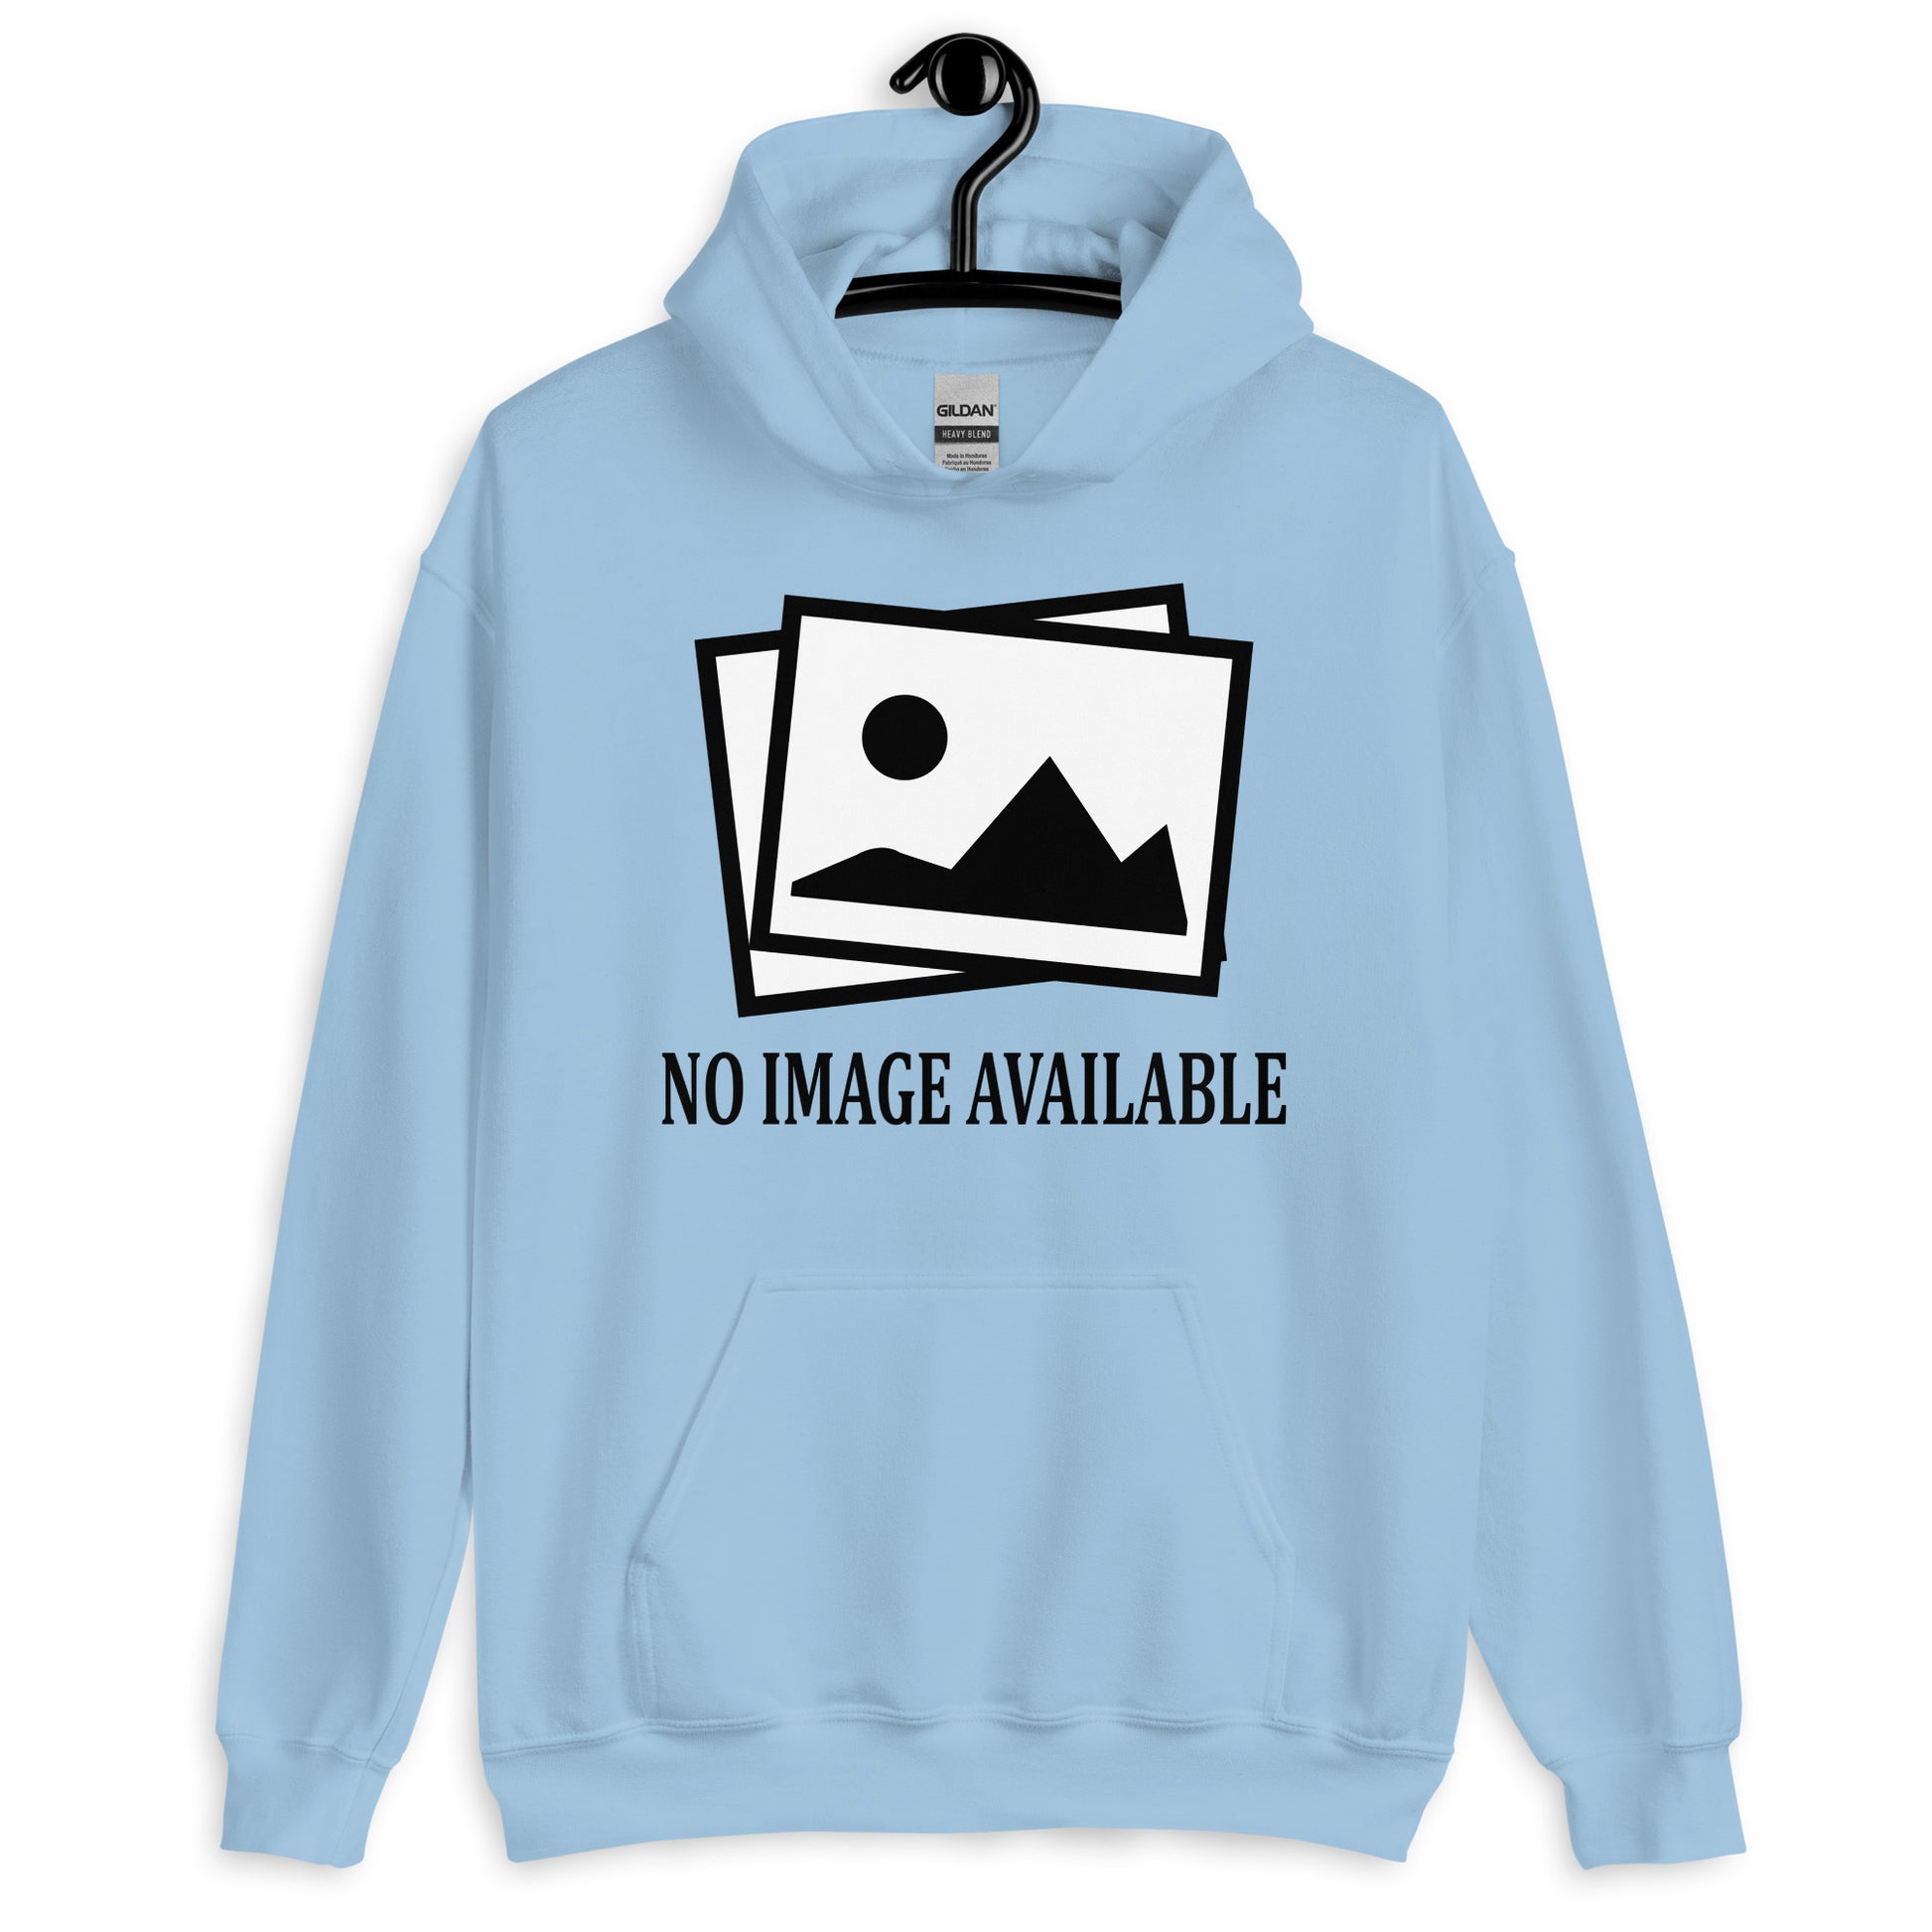 light blue hoodie with image and text "no image available"